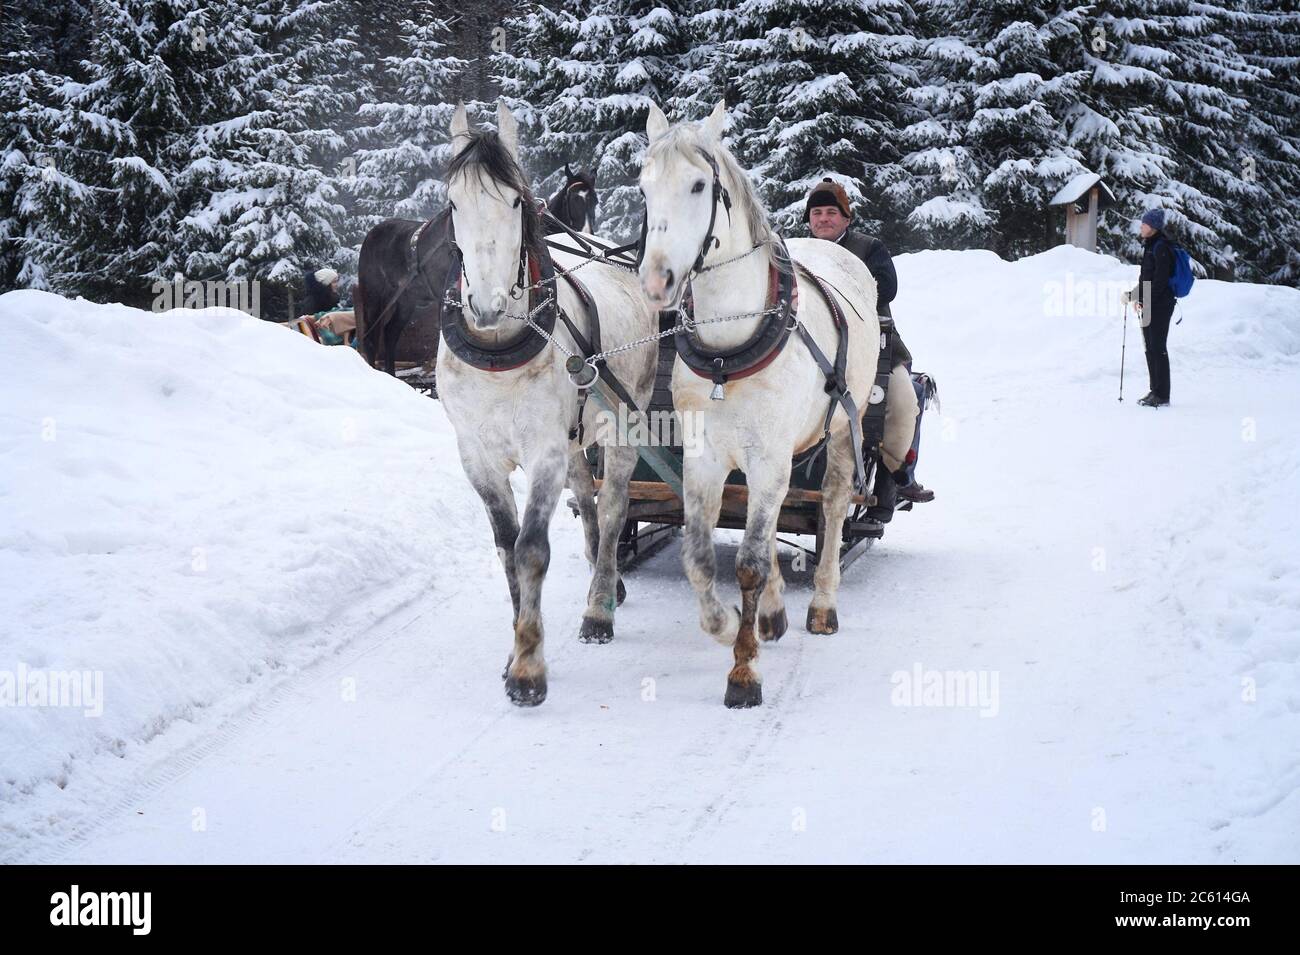 TATRY, POLAND - FEBRUARY 19, 2017: People ride a horse sleigh to Morskie Oko lake in Tatra National Park, Poland. It's one of most recognized tourism Stock Photo